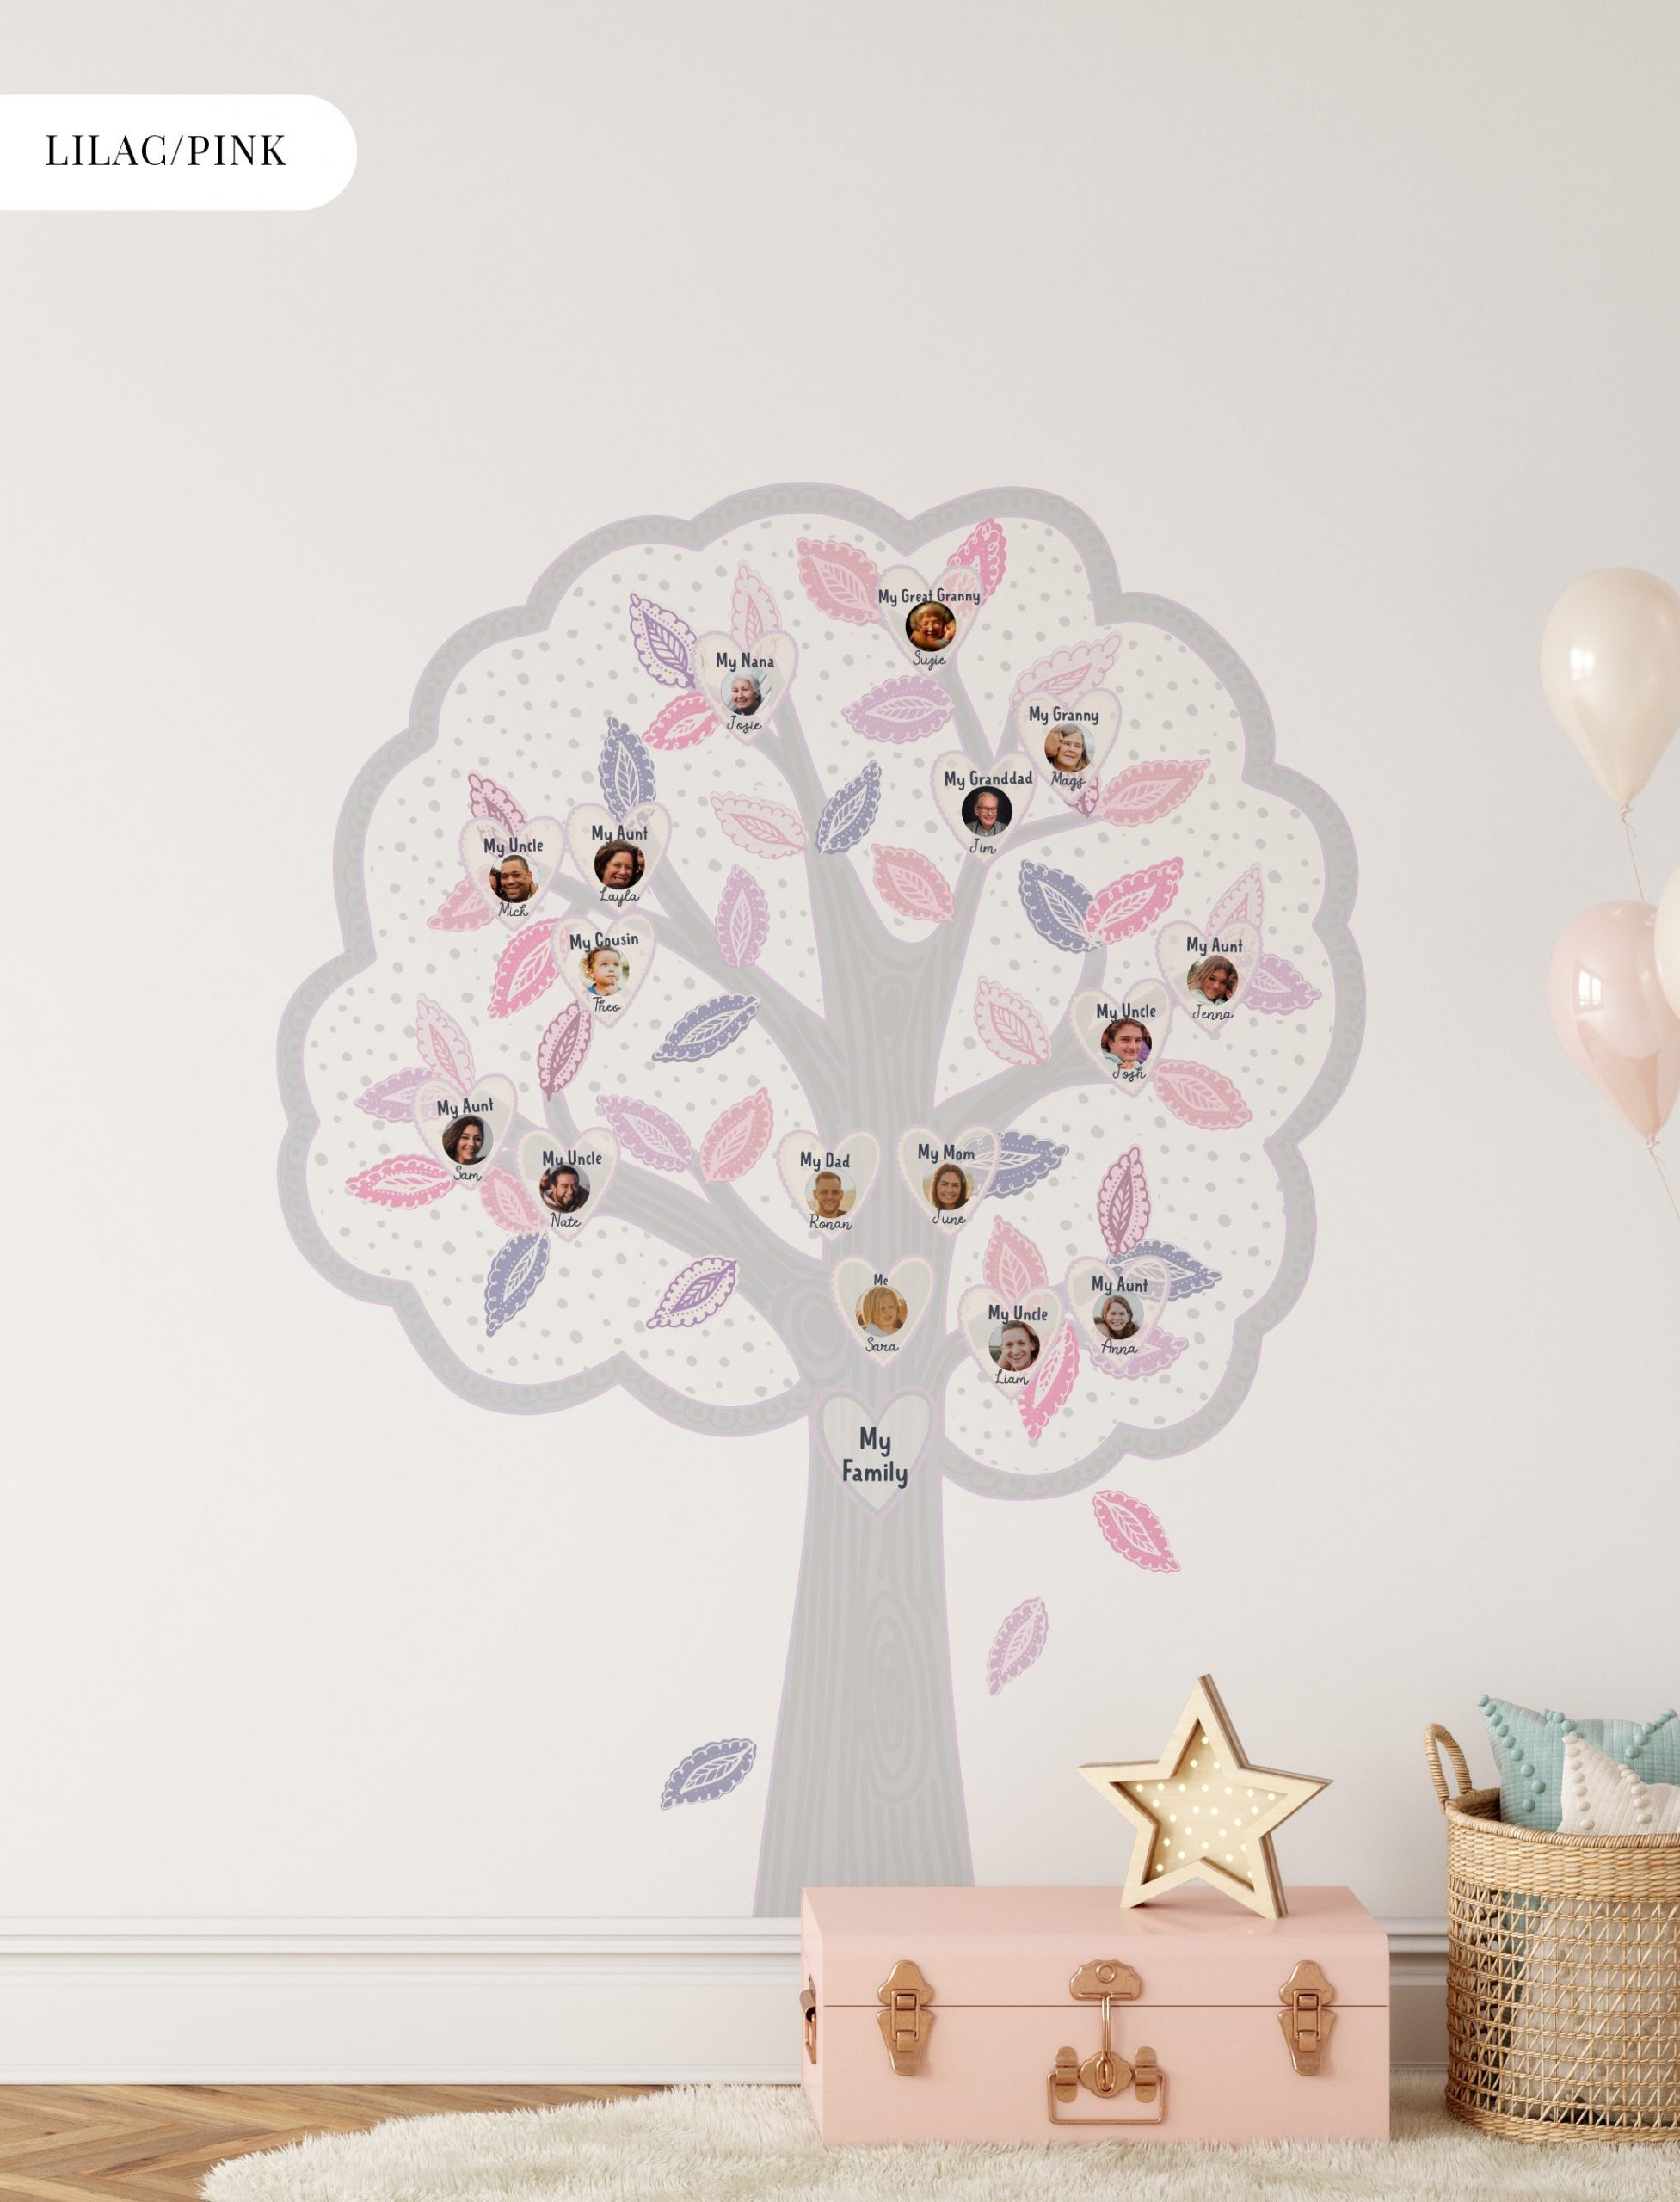 Personalised family tree